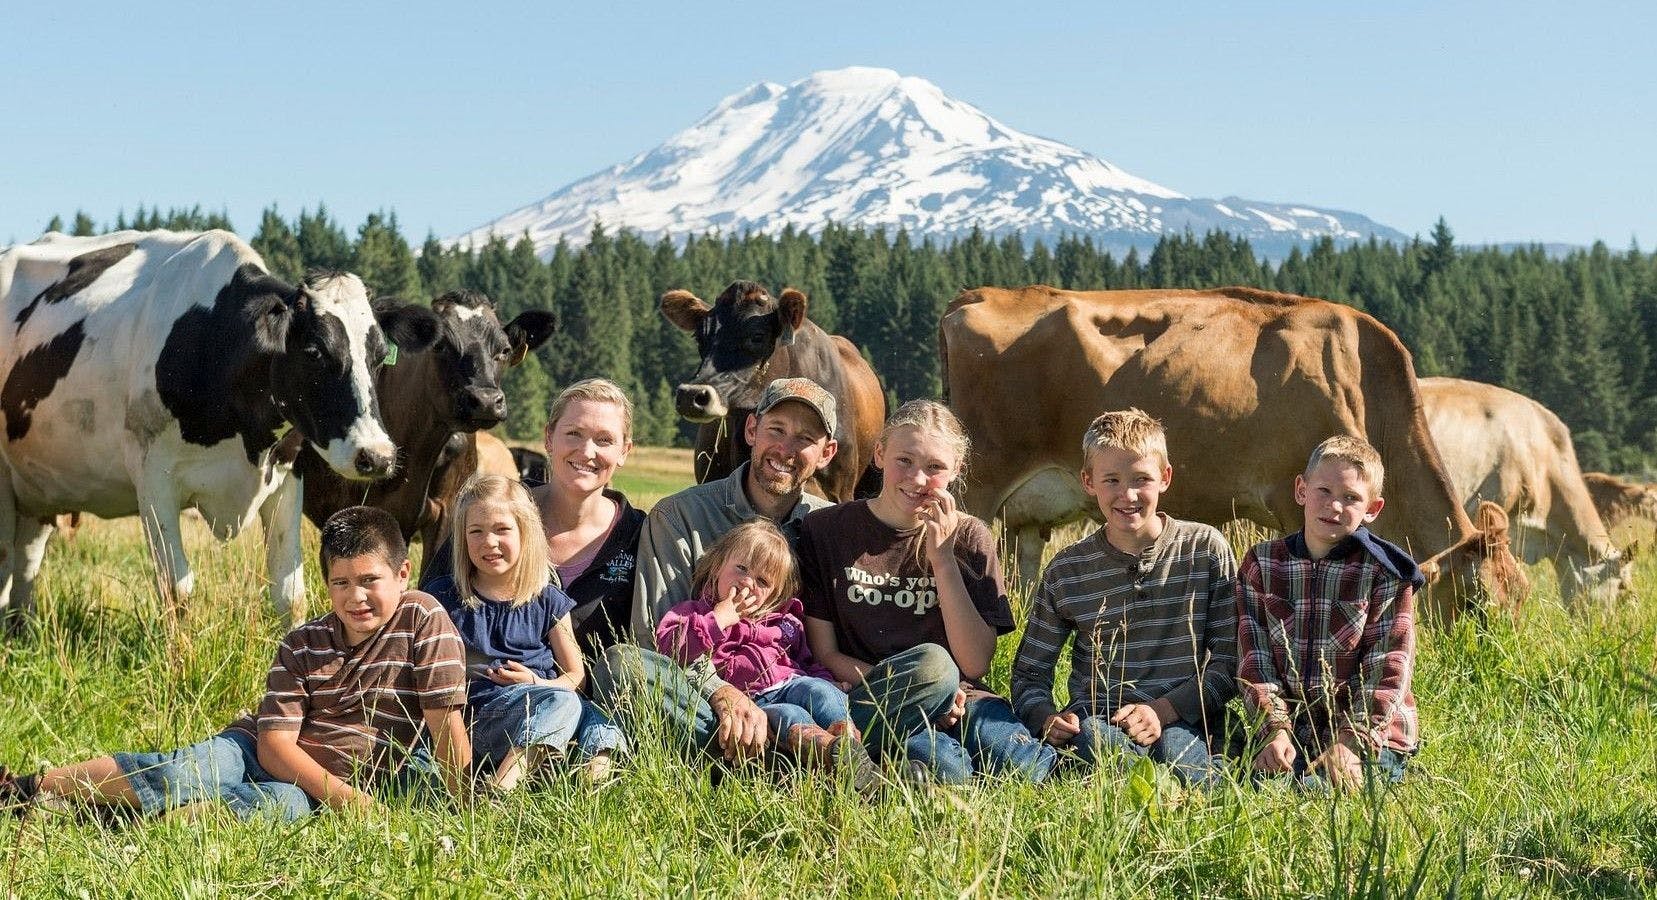 The Pearson family of Washington is a member of Organic Valley co-op.